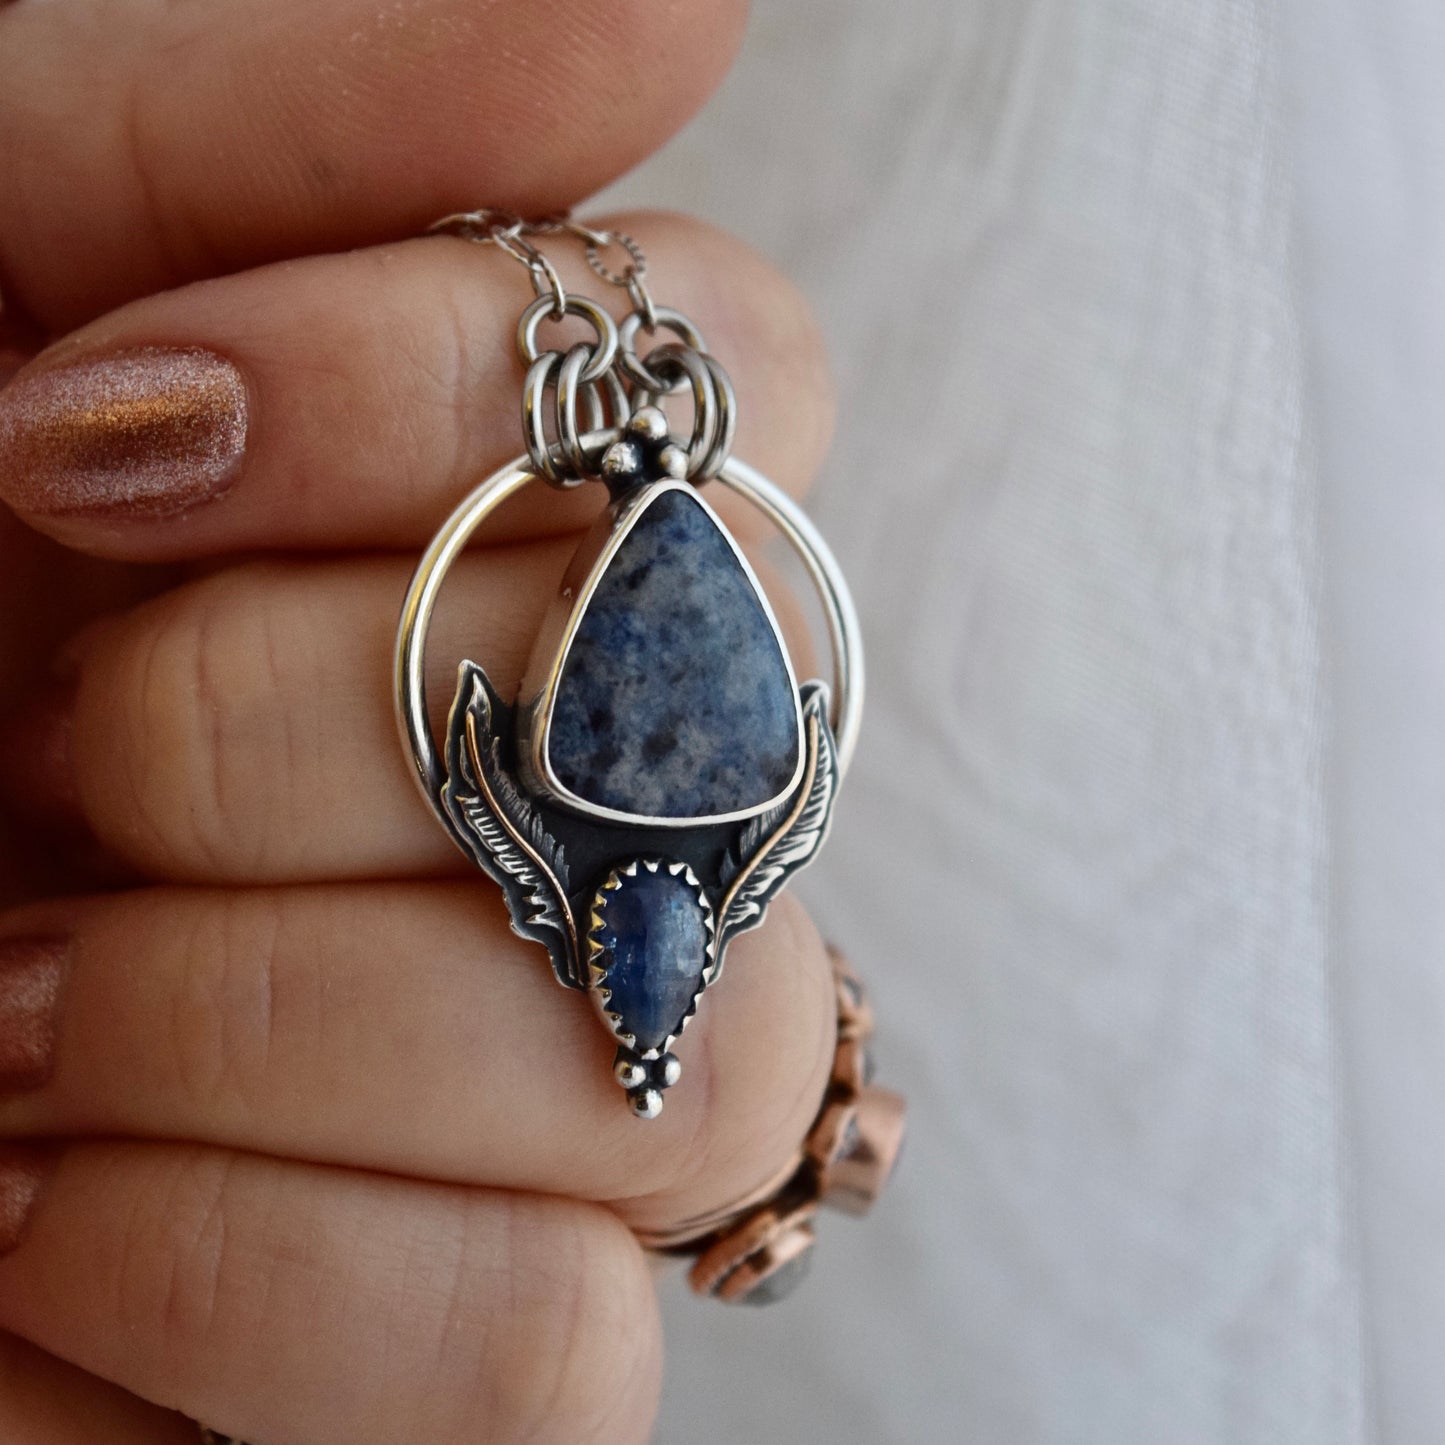 Eagle House Pendulum Pendant with Sodalite, Kyanite, and Gold Fill Details